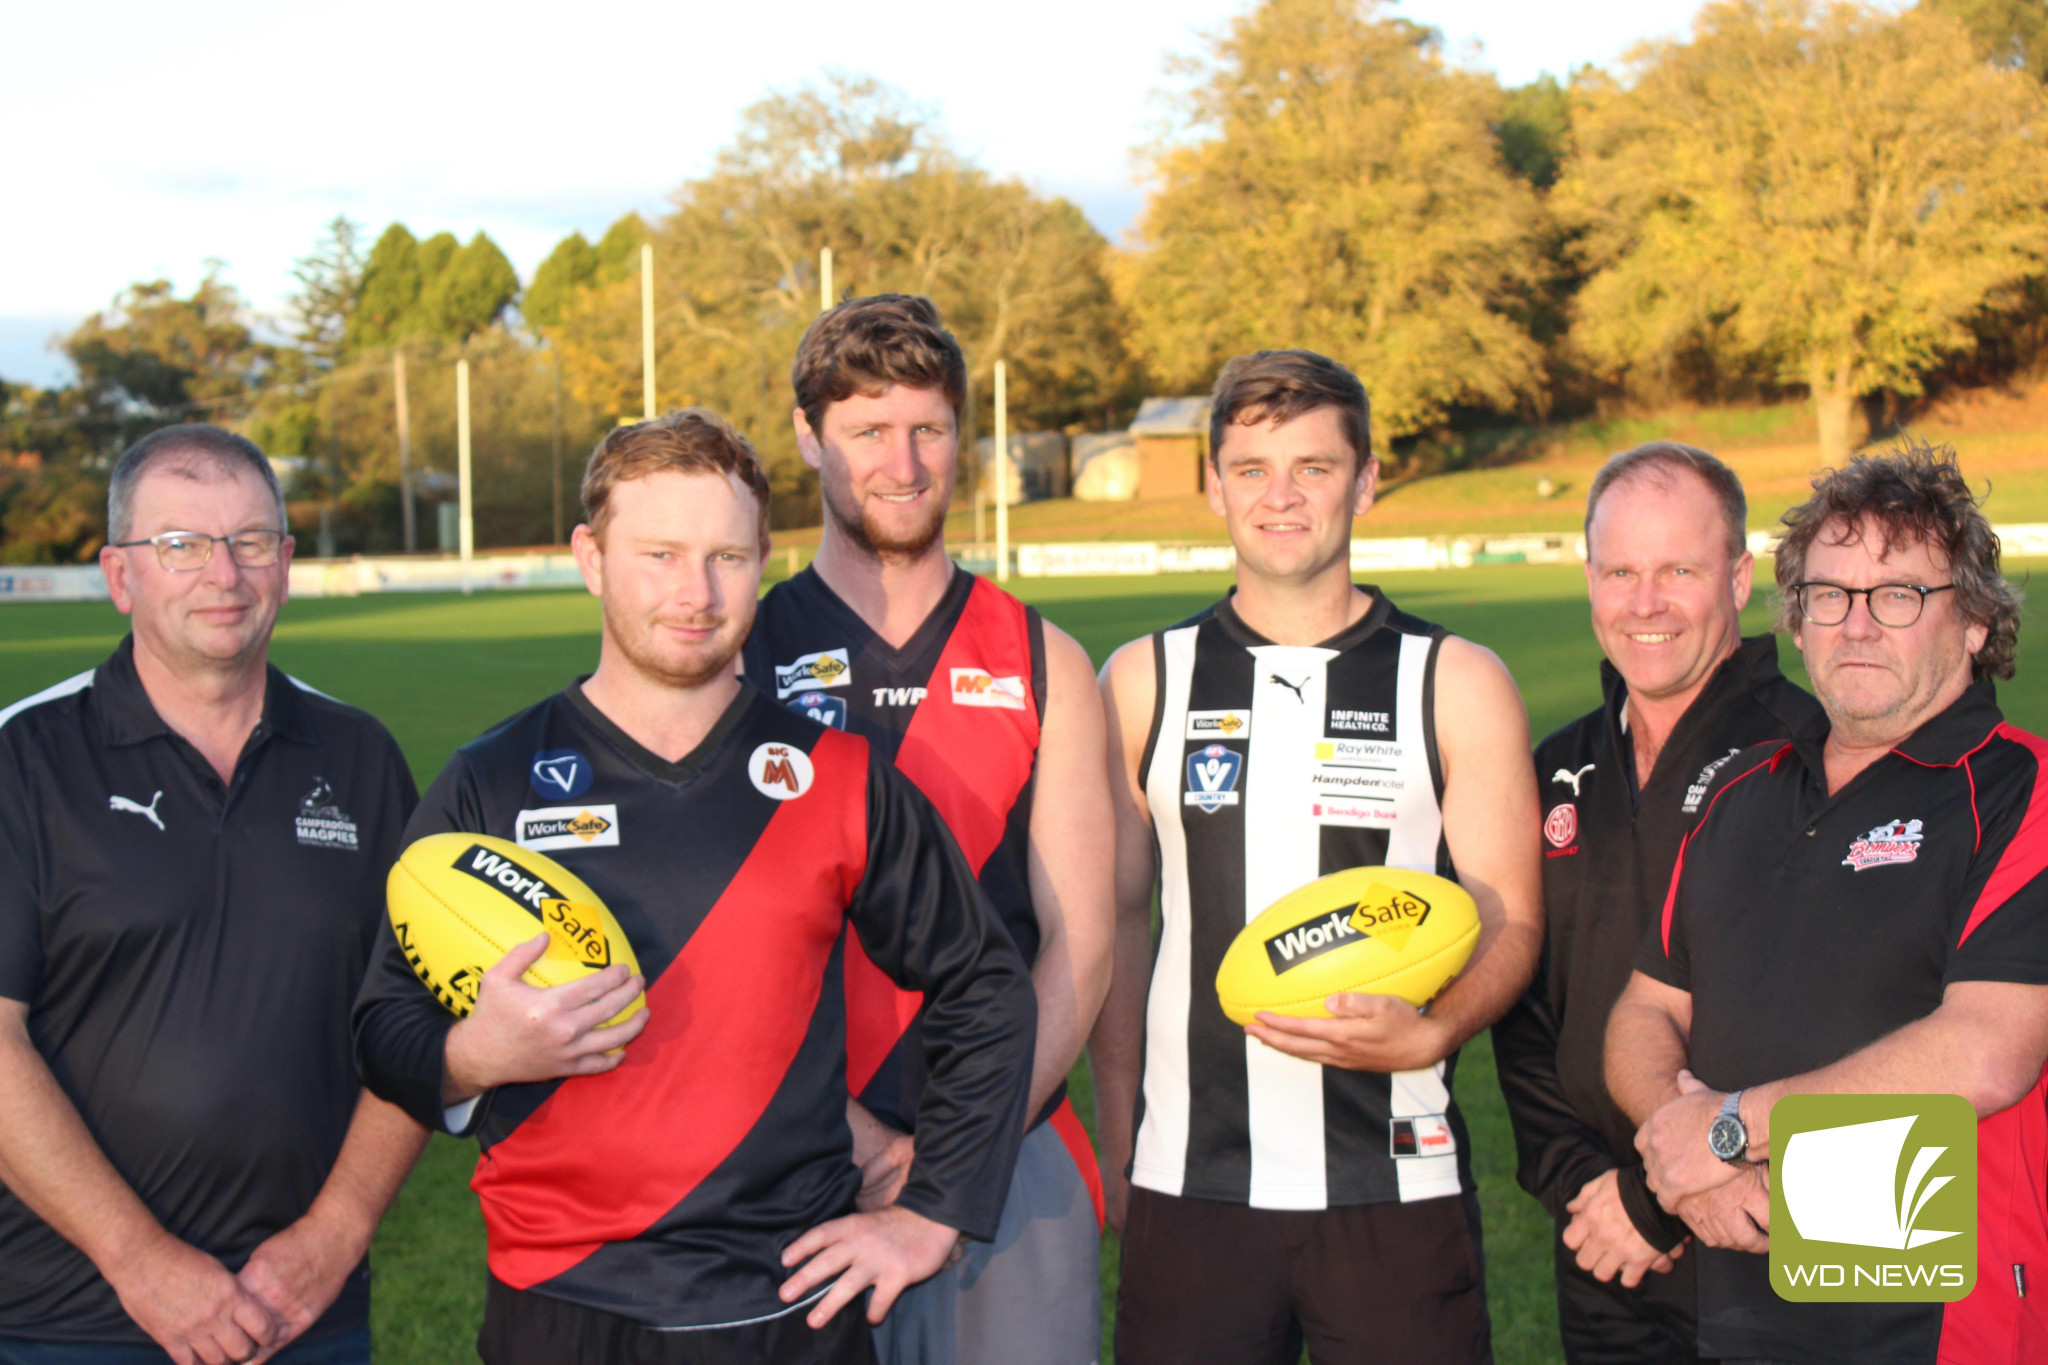 Both the Camperdown and Cobden football netball clubs are looking forward to tomorrow’s round.